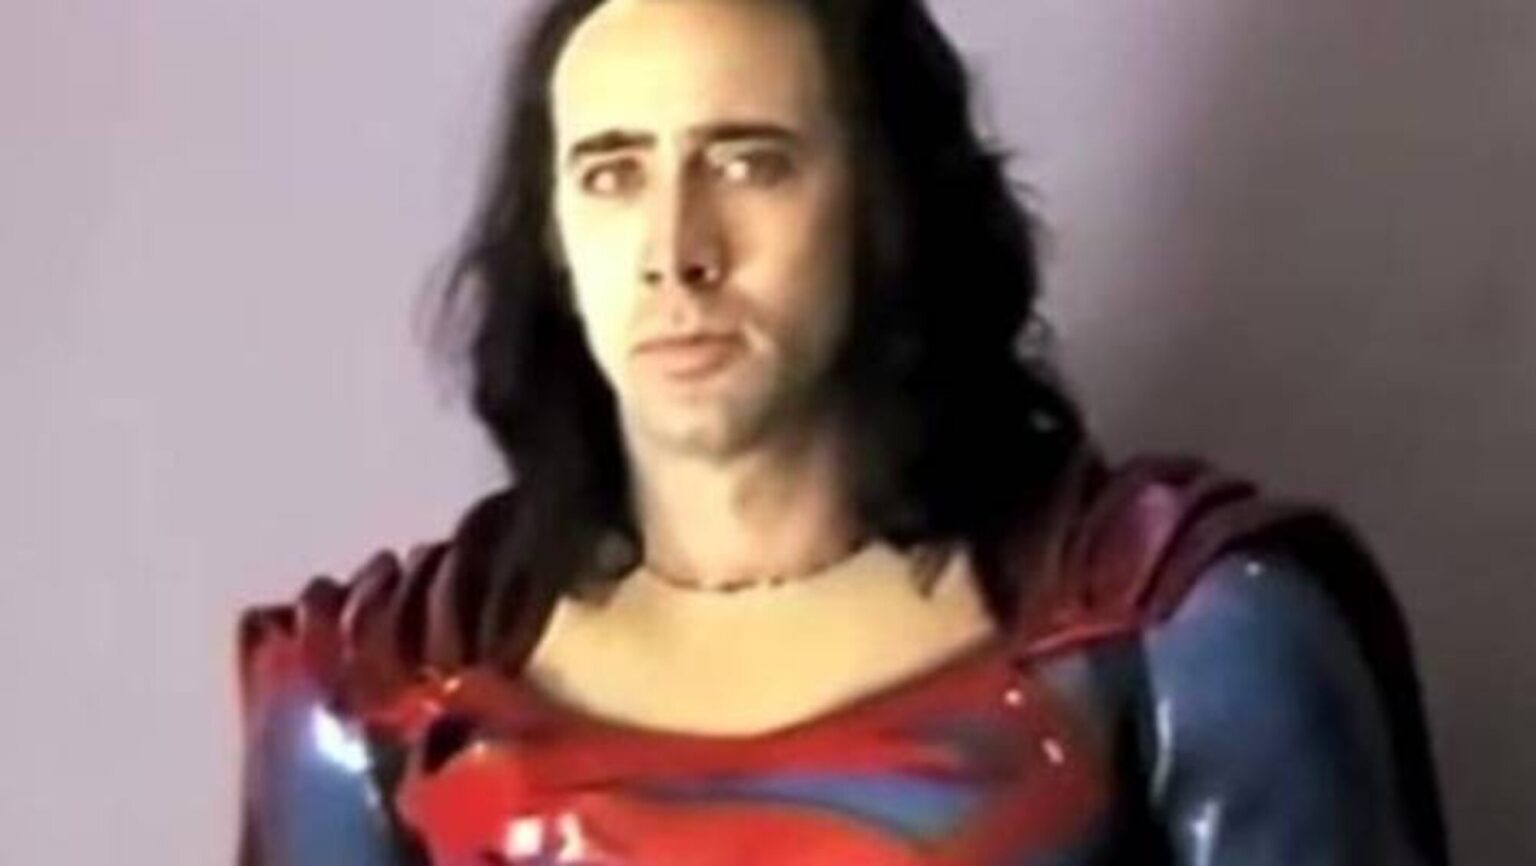 Did you know Nicolas Cage was this close to playing the role of Superman? Check out all of the other cool films the world sadly missed out on here.